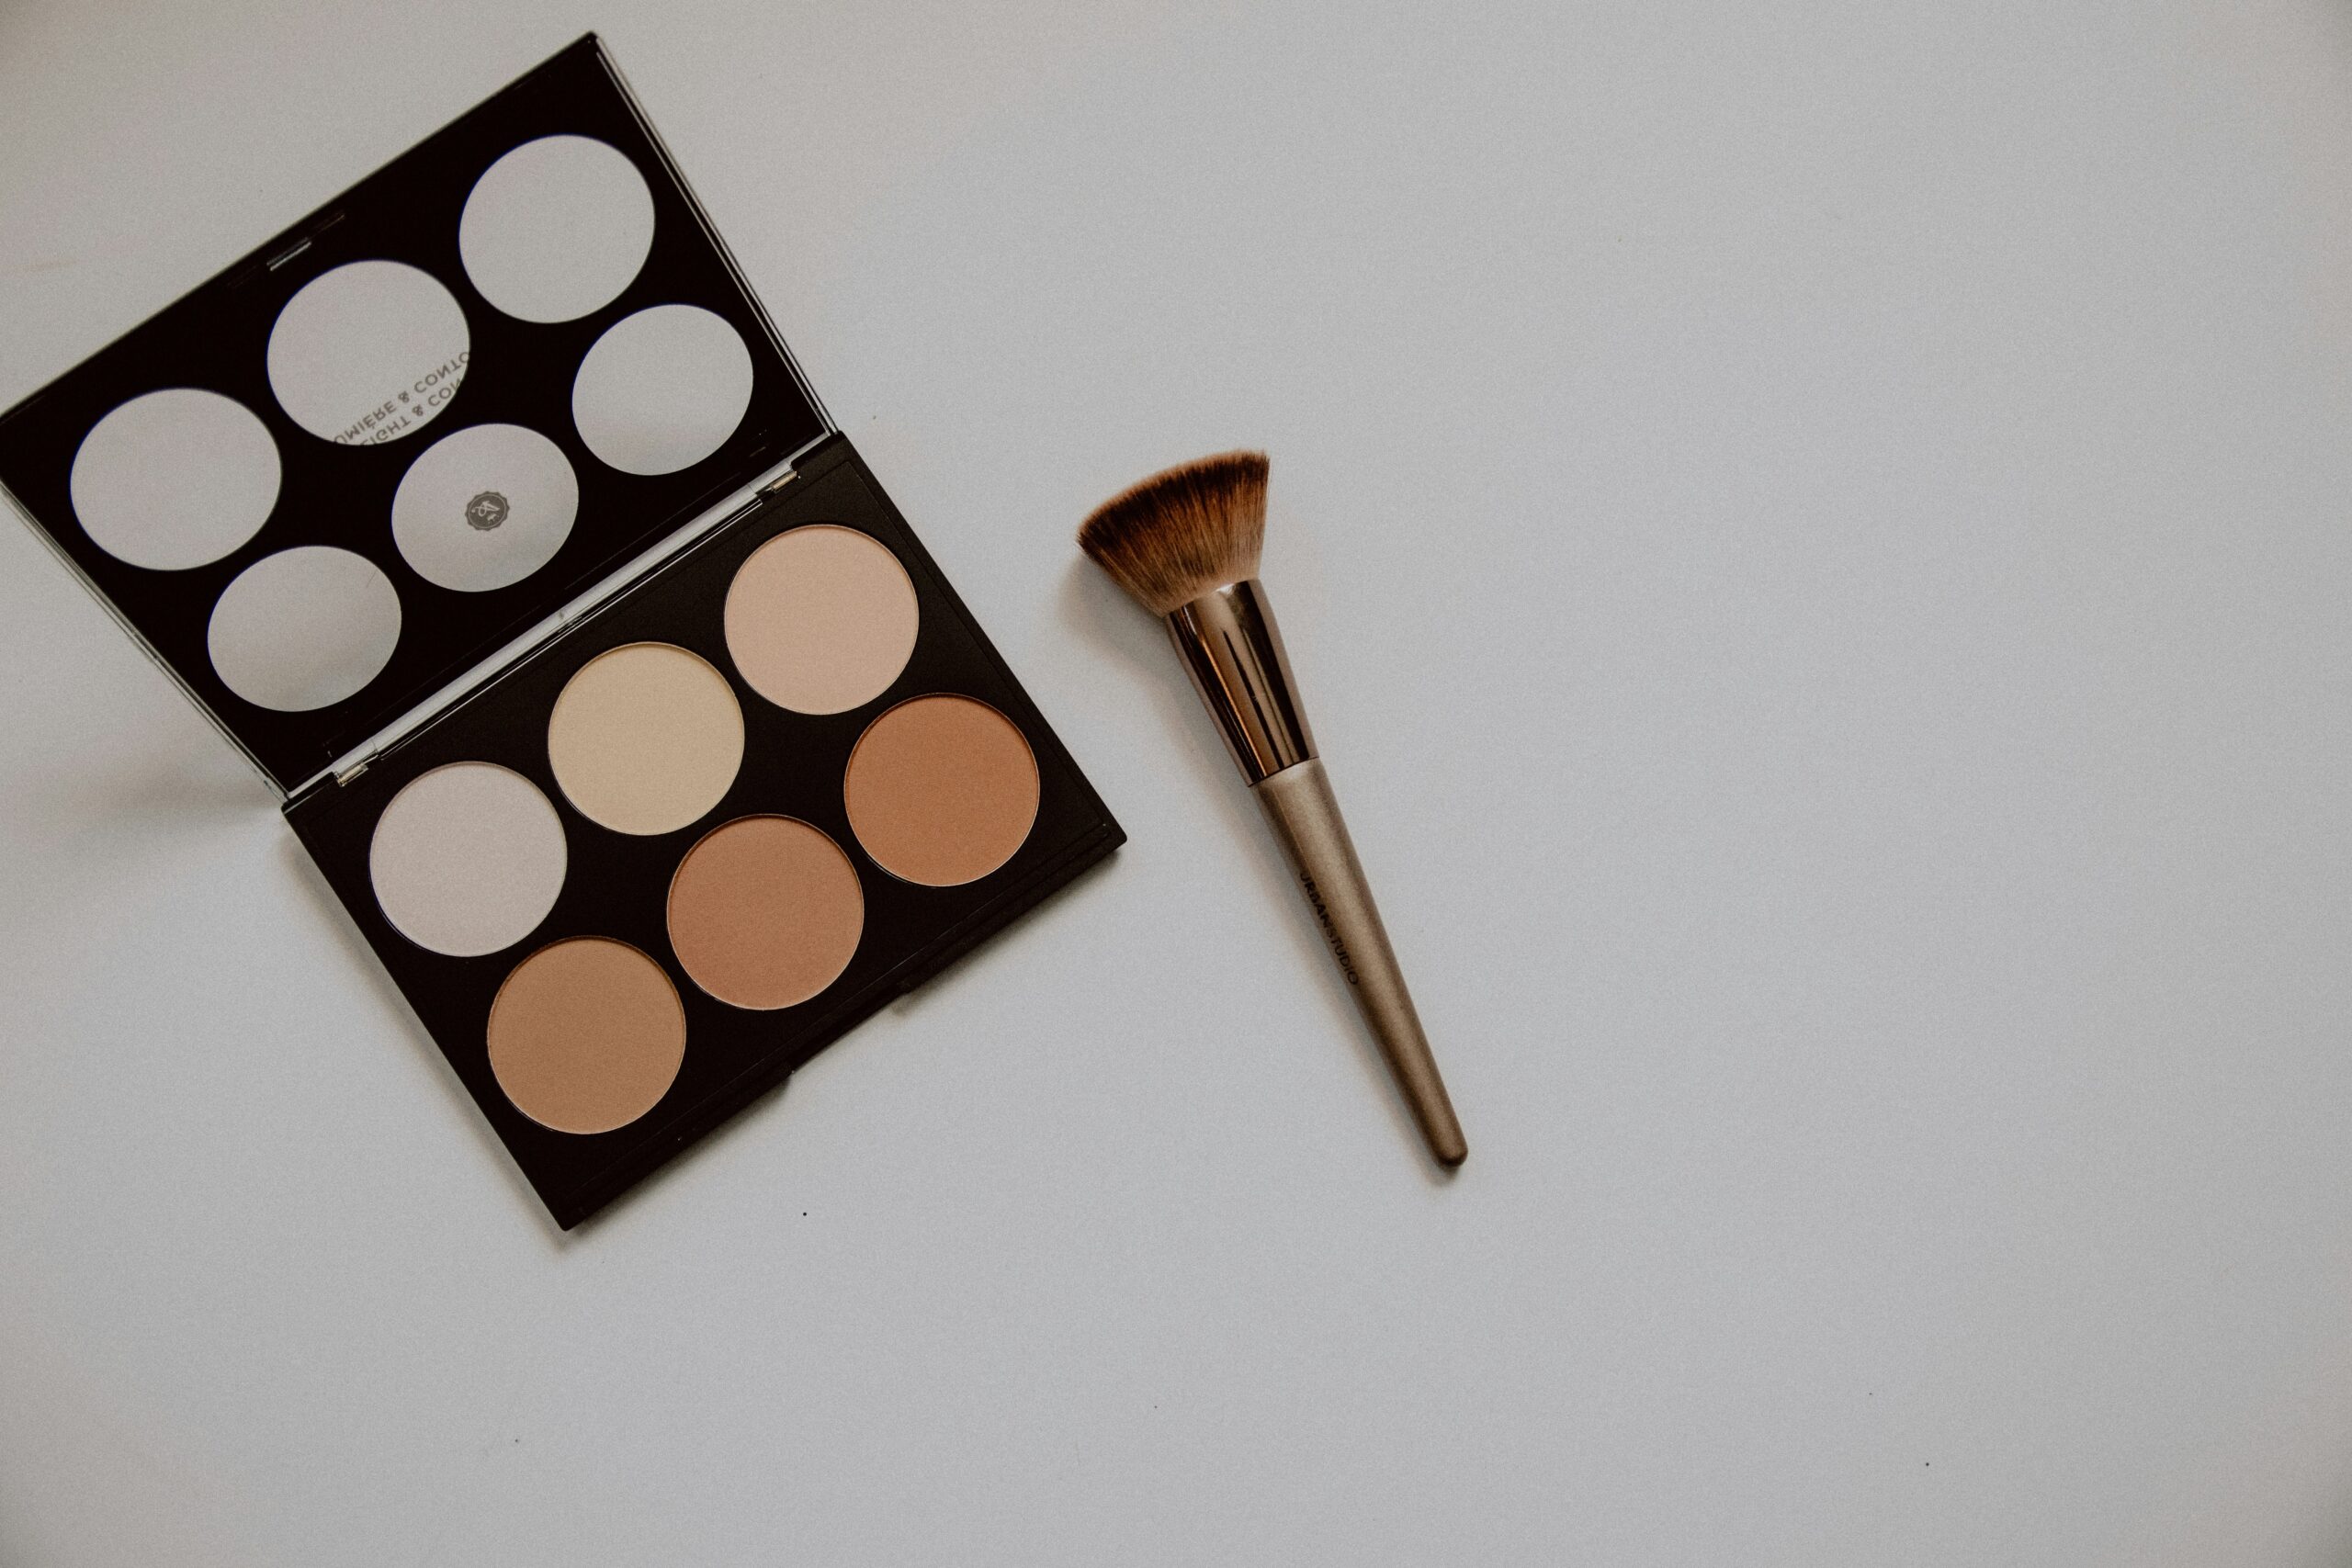 The 'Conceal & Correct' EVERYTHING Palette